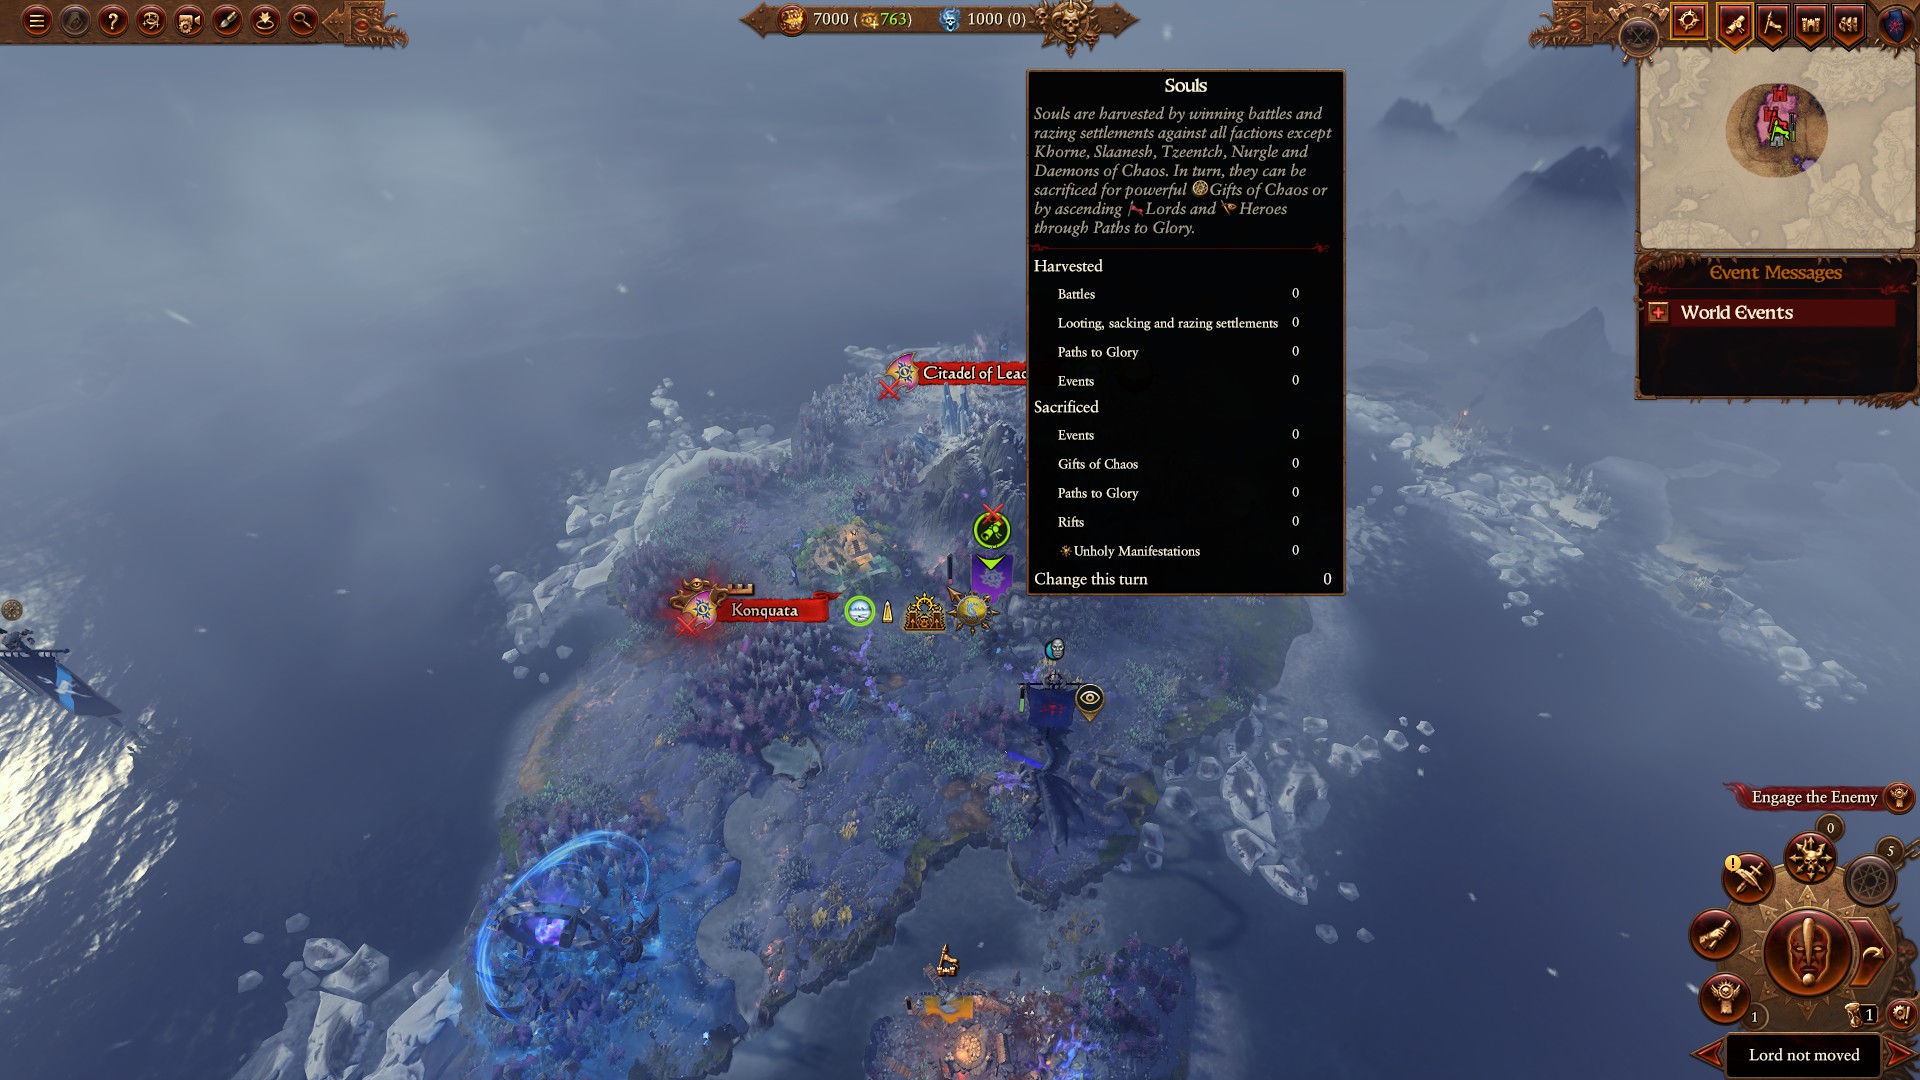 Total War: Warhammer 3 Immortal Empires Be'lakor - Warriors of Chaos campaign overview, guide and second thoughts image 3